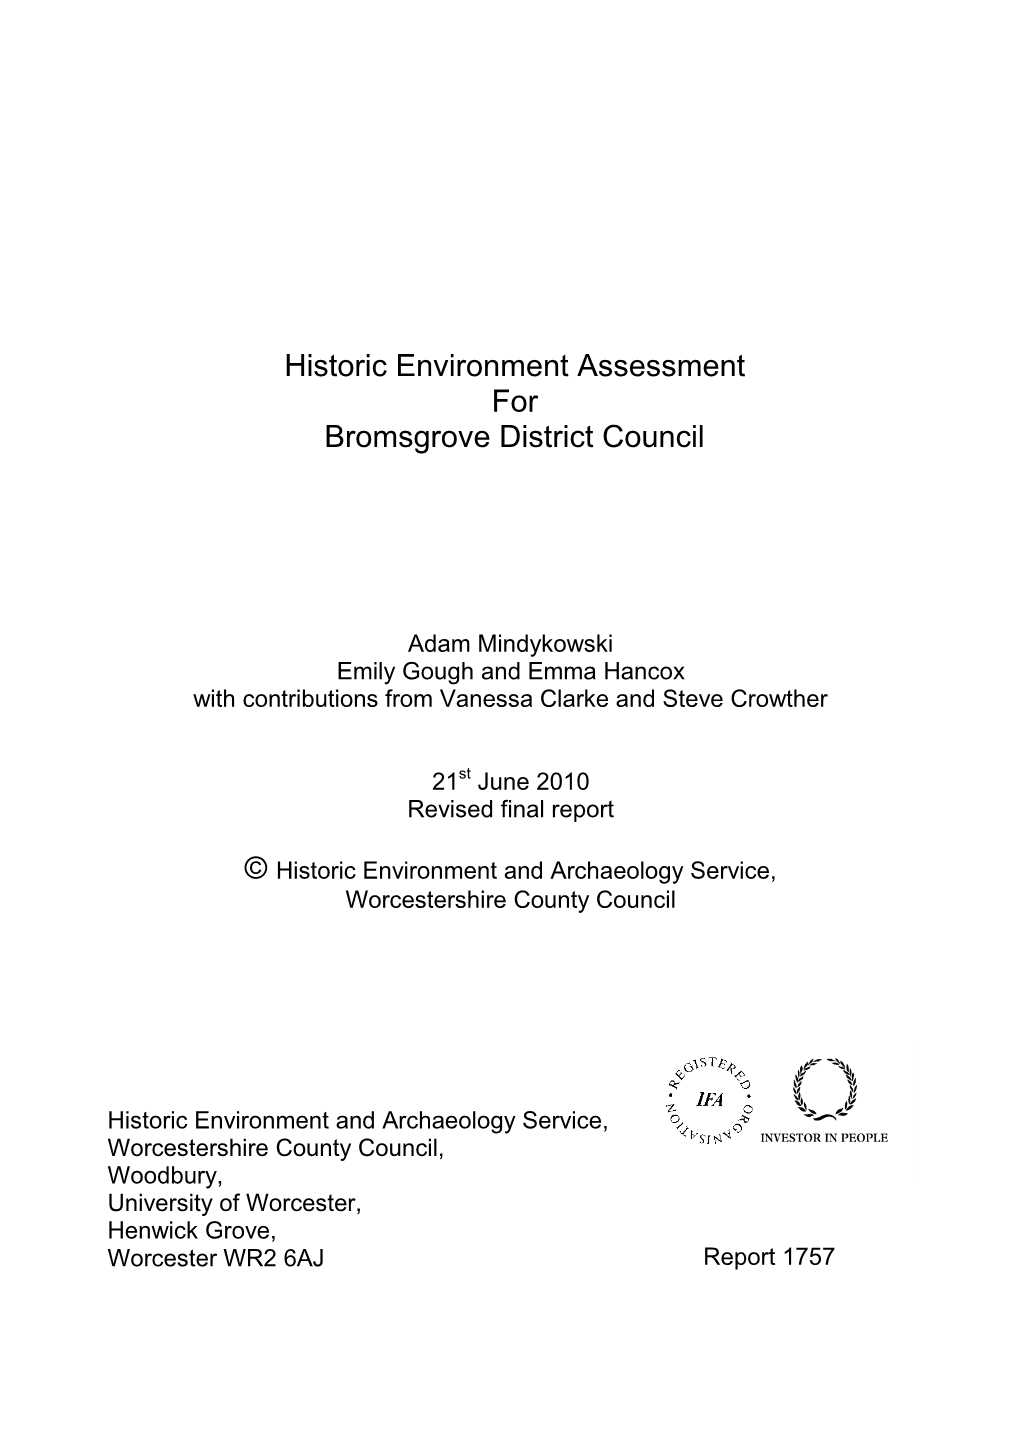 Historic Environment Assessment for Bromsgrove District Council